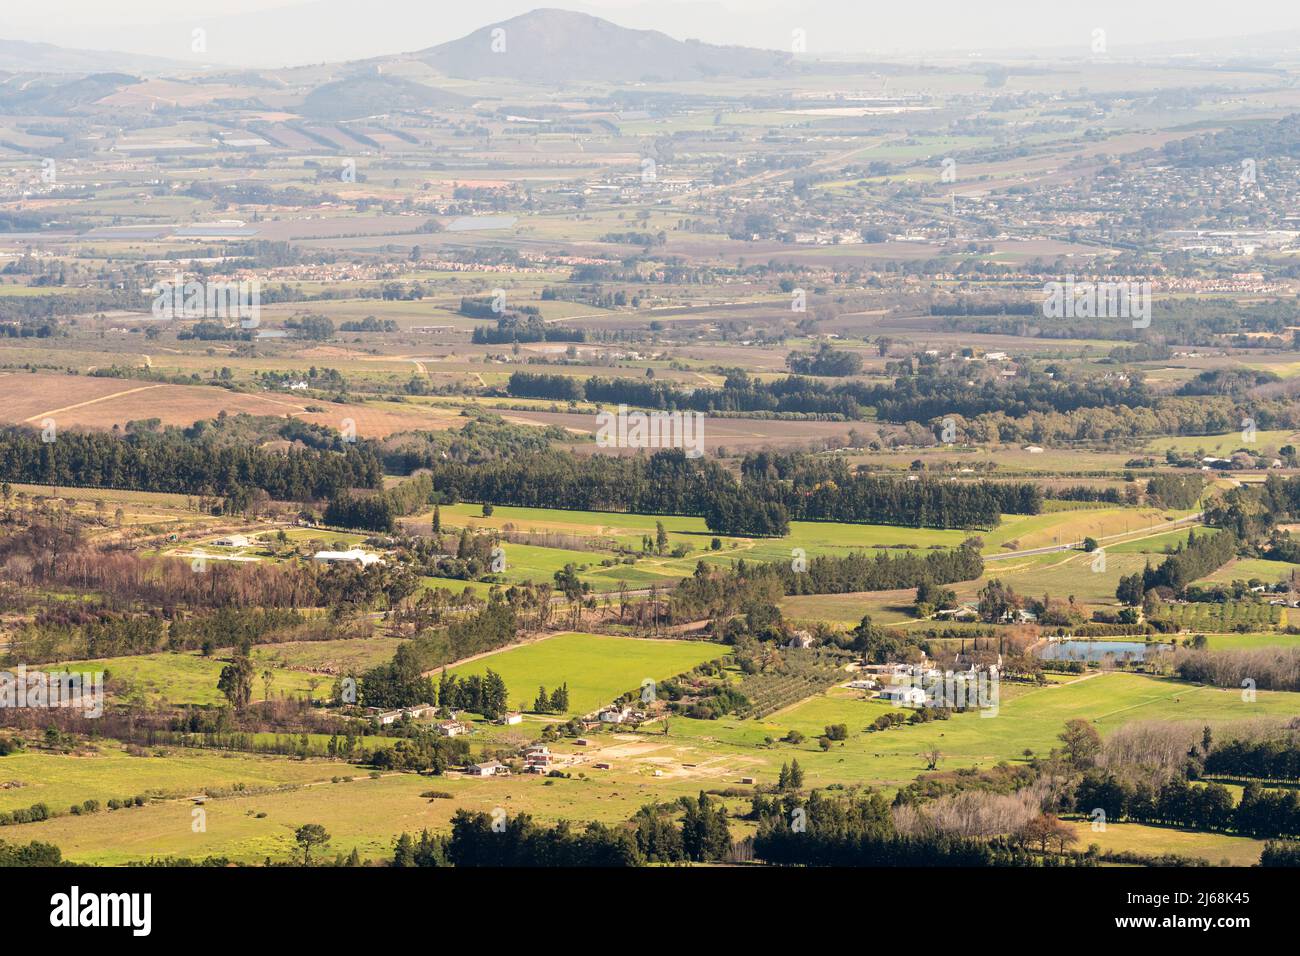 aerial view or view from above looking down on scenic agricultural  landscape region of Paarl, Western Cape, South Africa in Winter Stock Photo